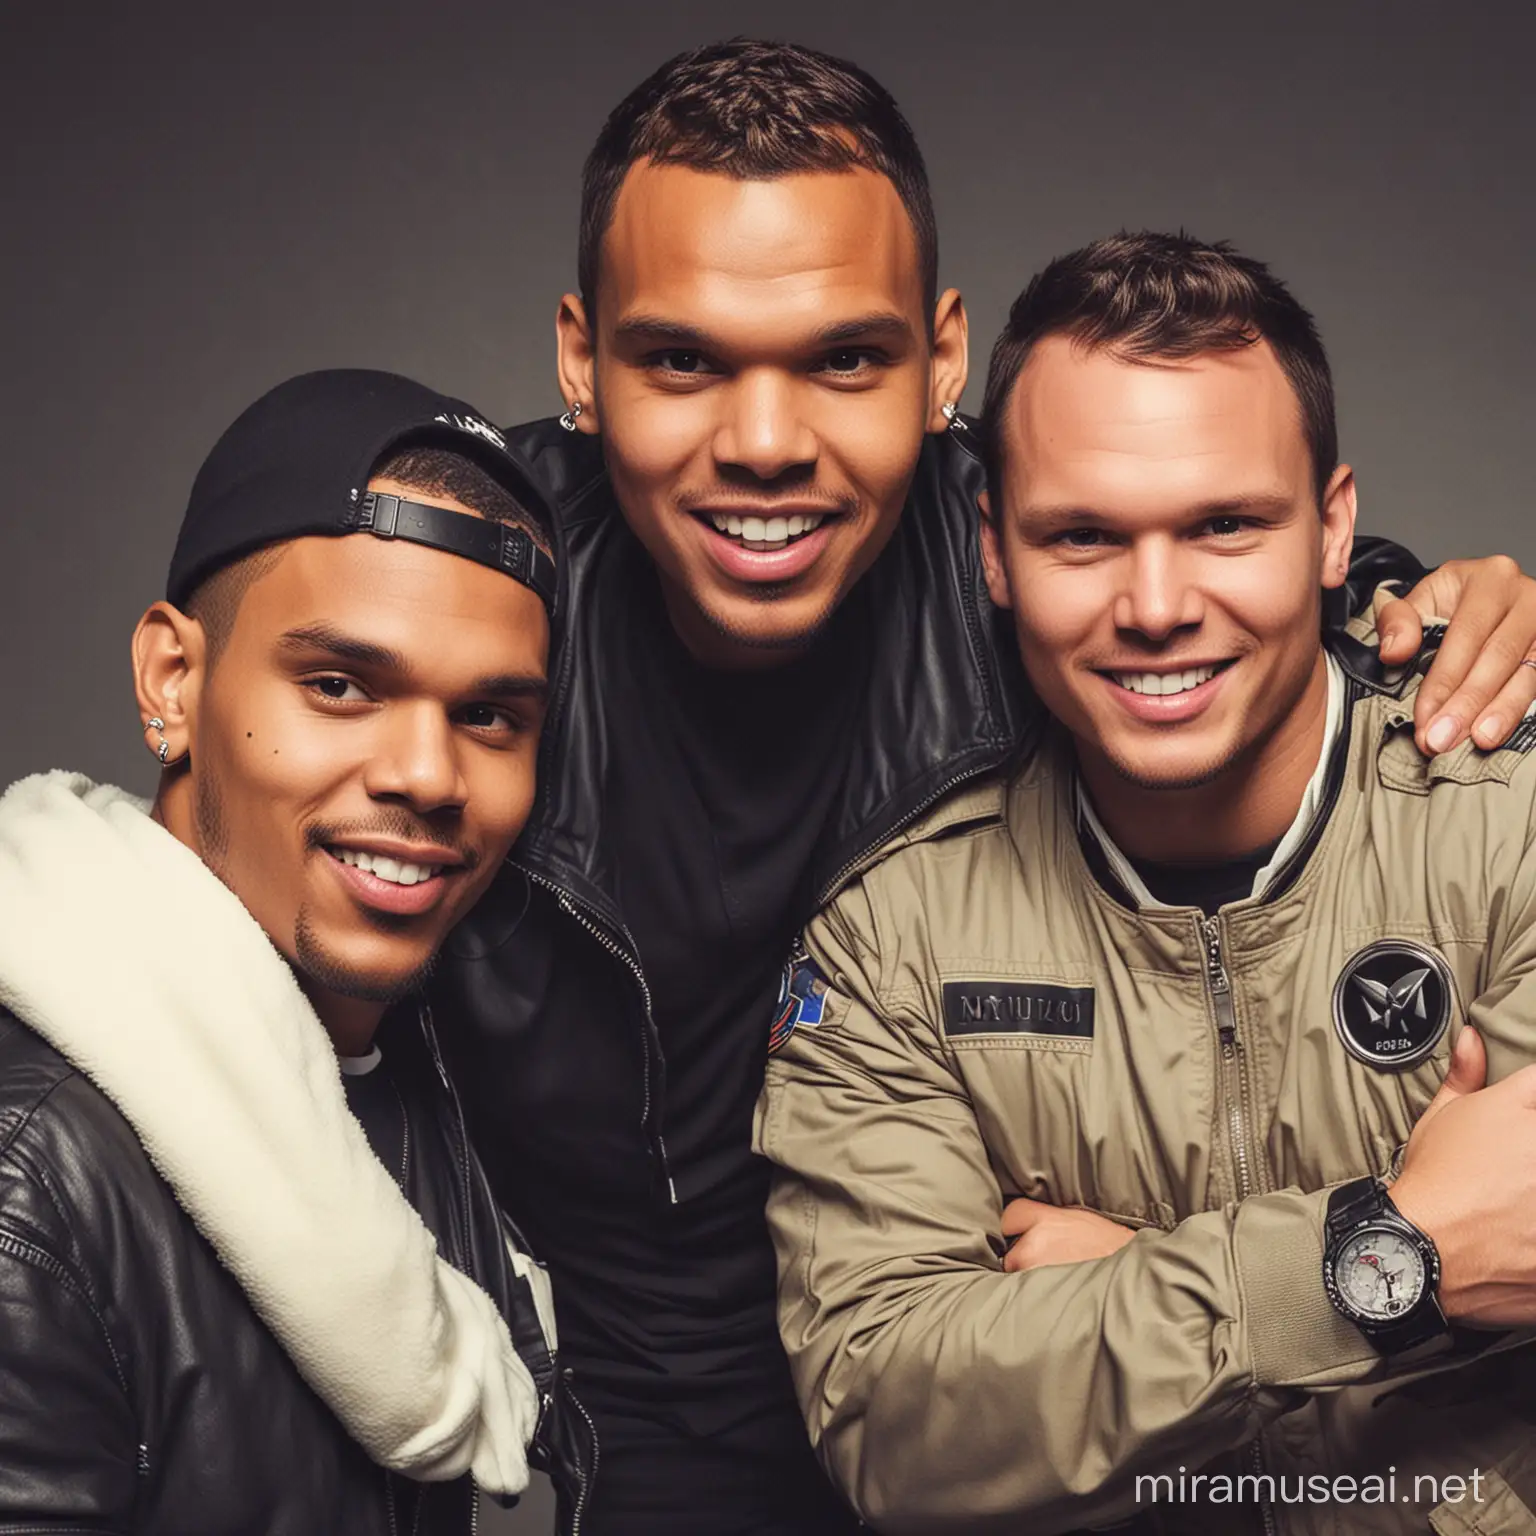 Music Icons Muzzy D Pilot Chris Brown and Tiesto Collaboration Concert